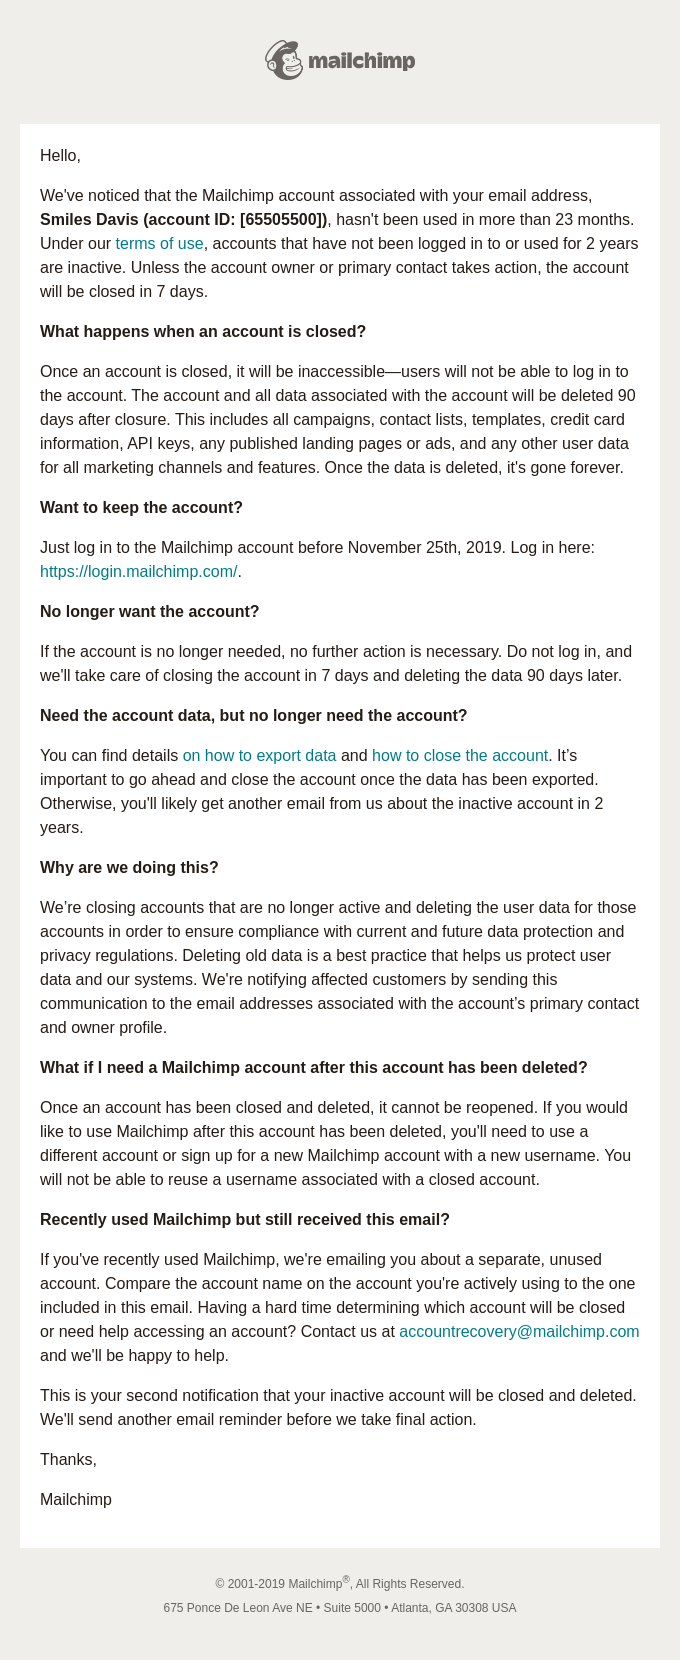 Your Inactive Mailchimp Account is Closing